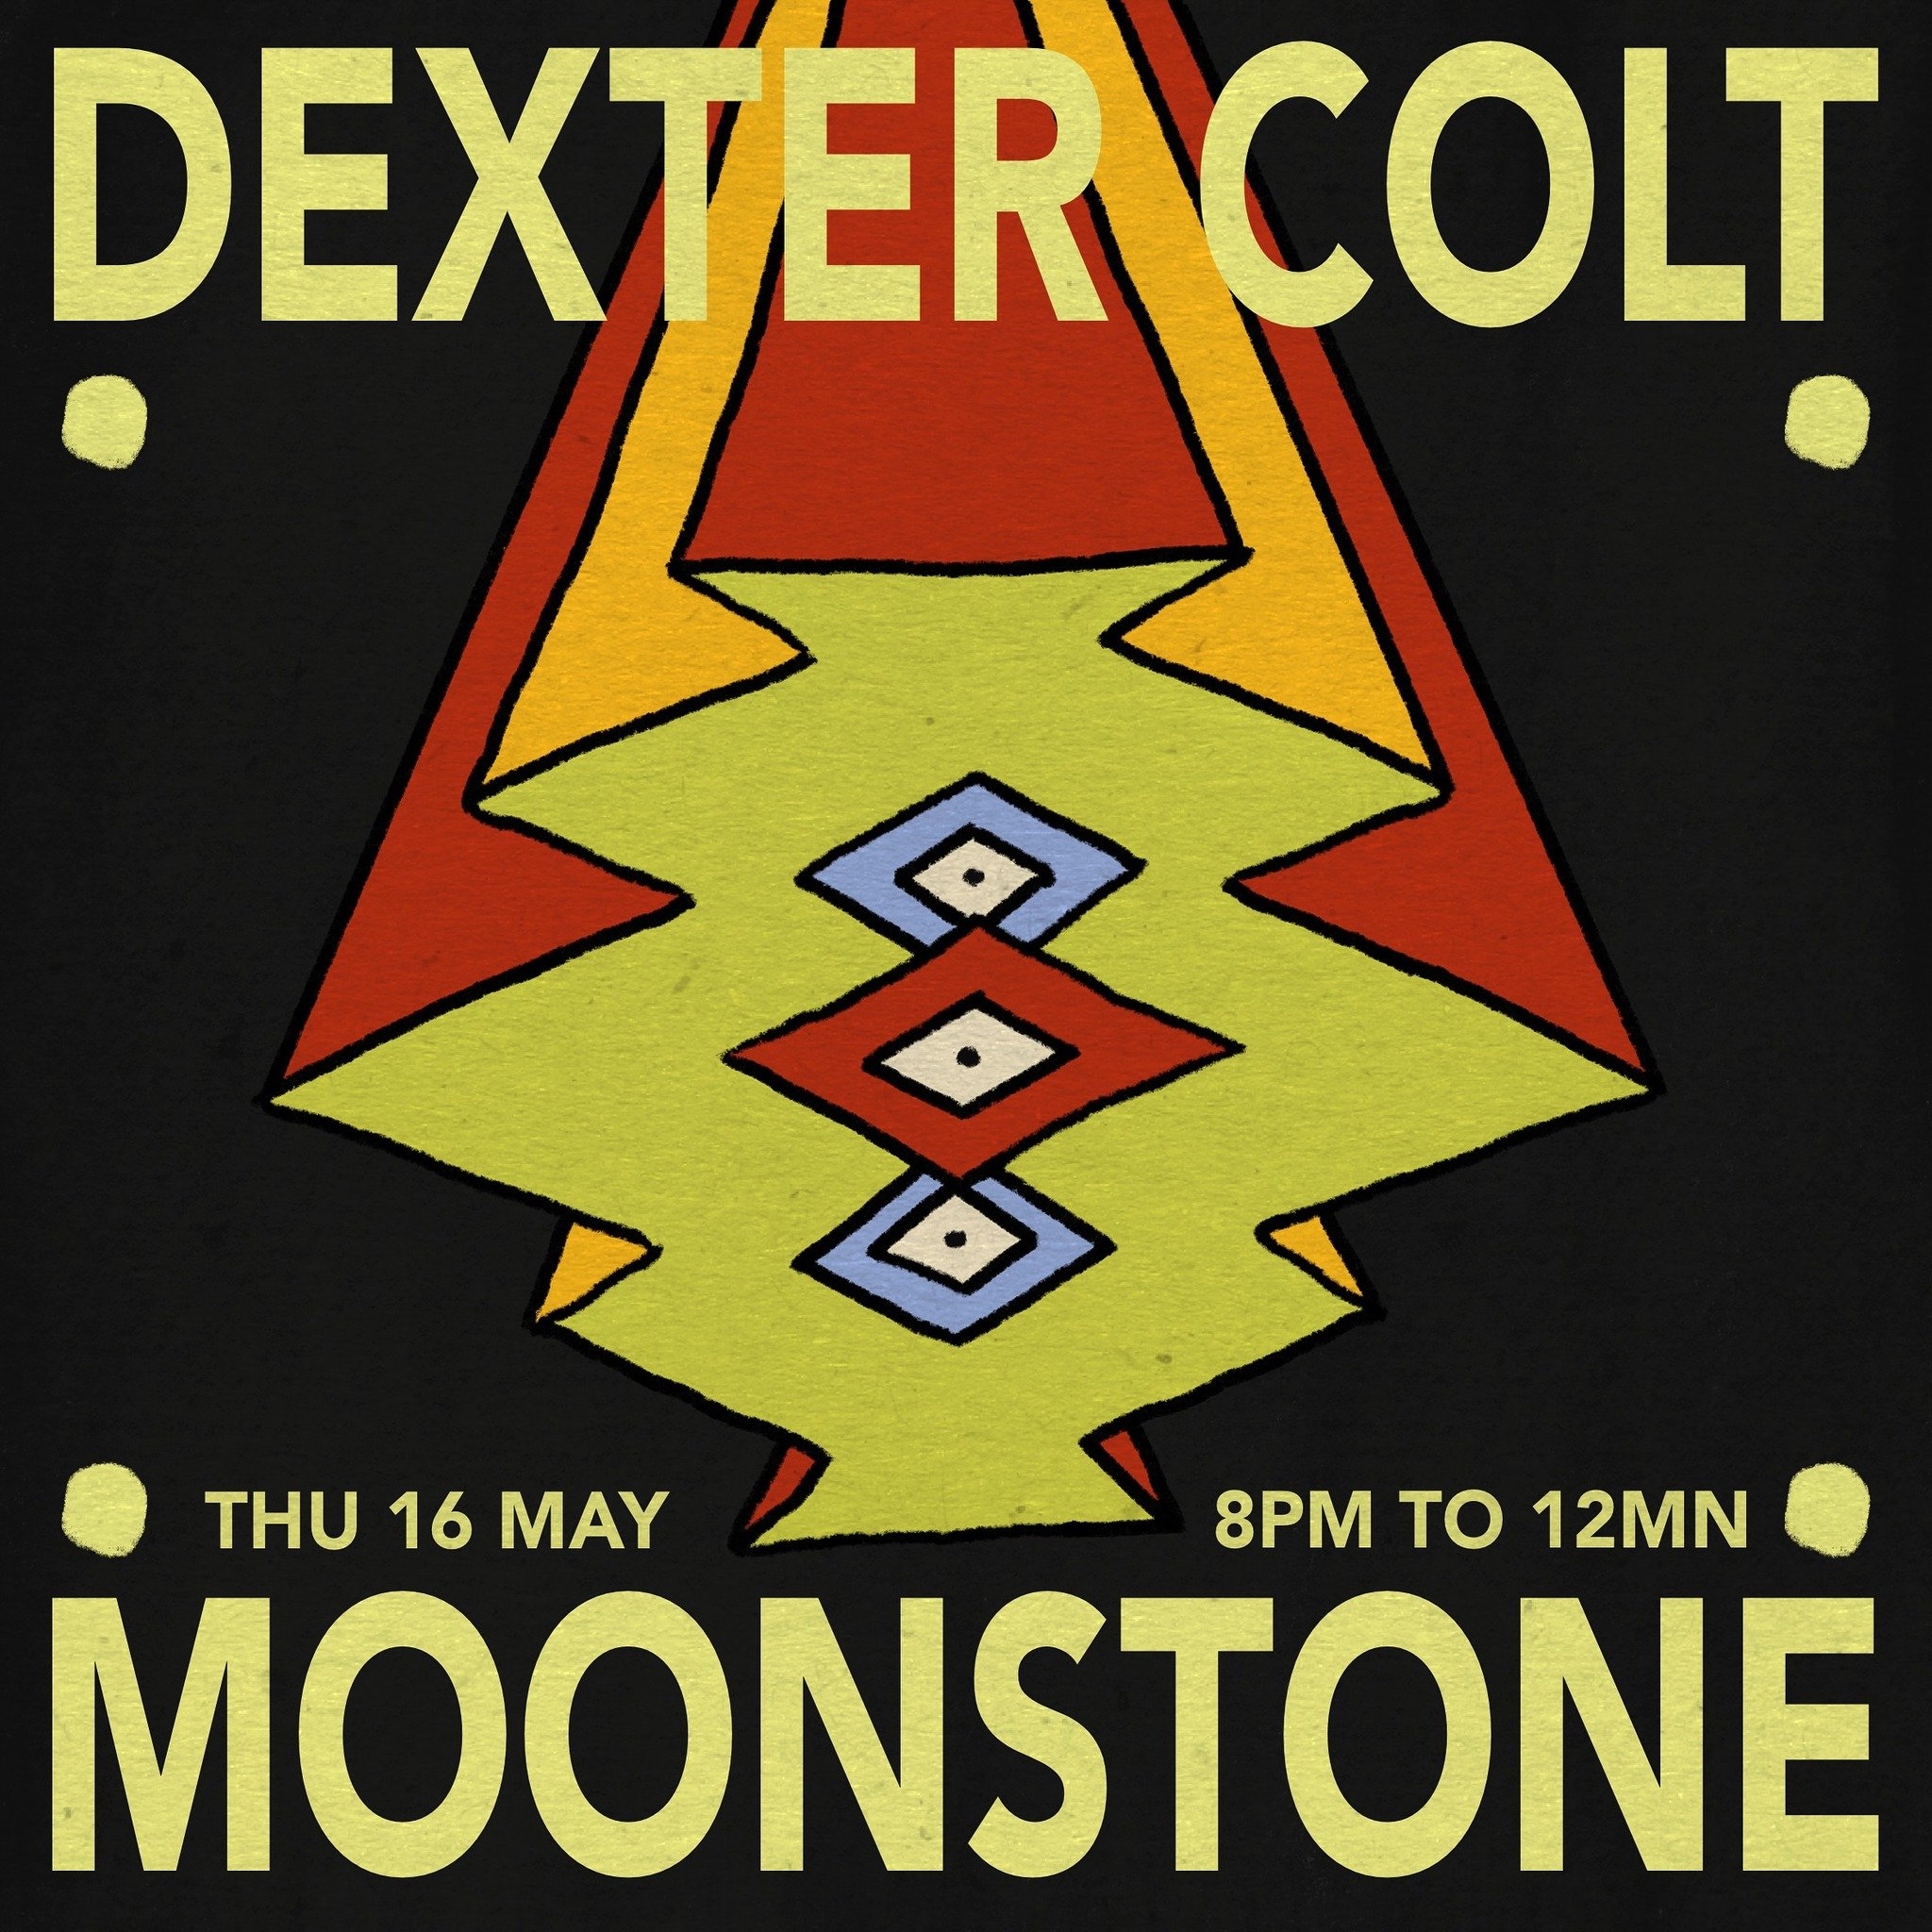 A diverse selector and budding producer from Singapore&rsquo;s Darker Than Wax label, Dexter Colt fuses a deep love for the most soulful sounds with booming machine workouts, raw disco cuts and sub bass pressure. A student of pirate radio and NYC clu